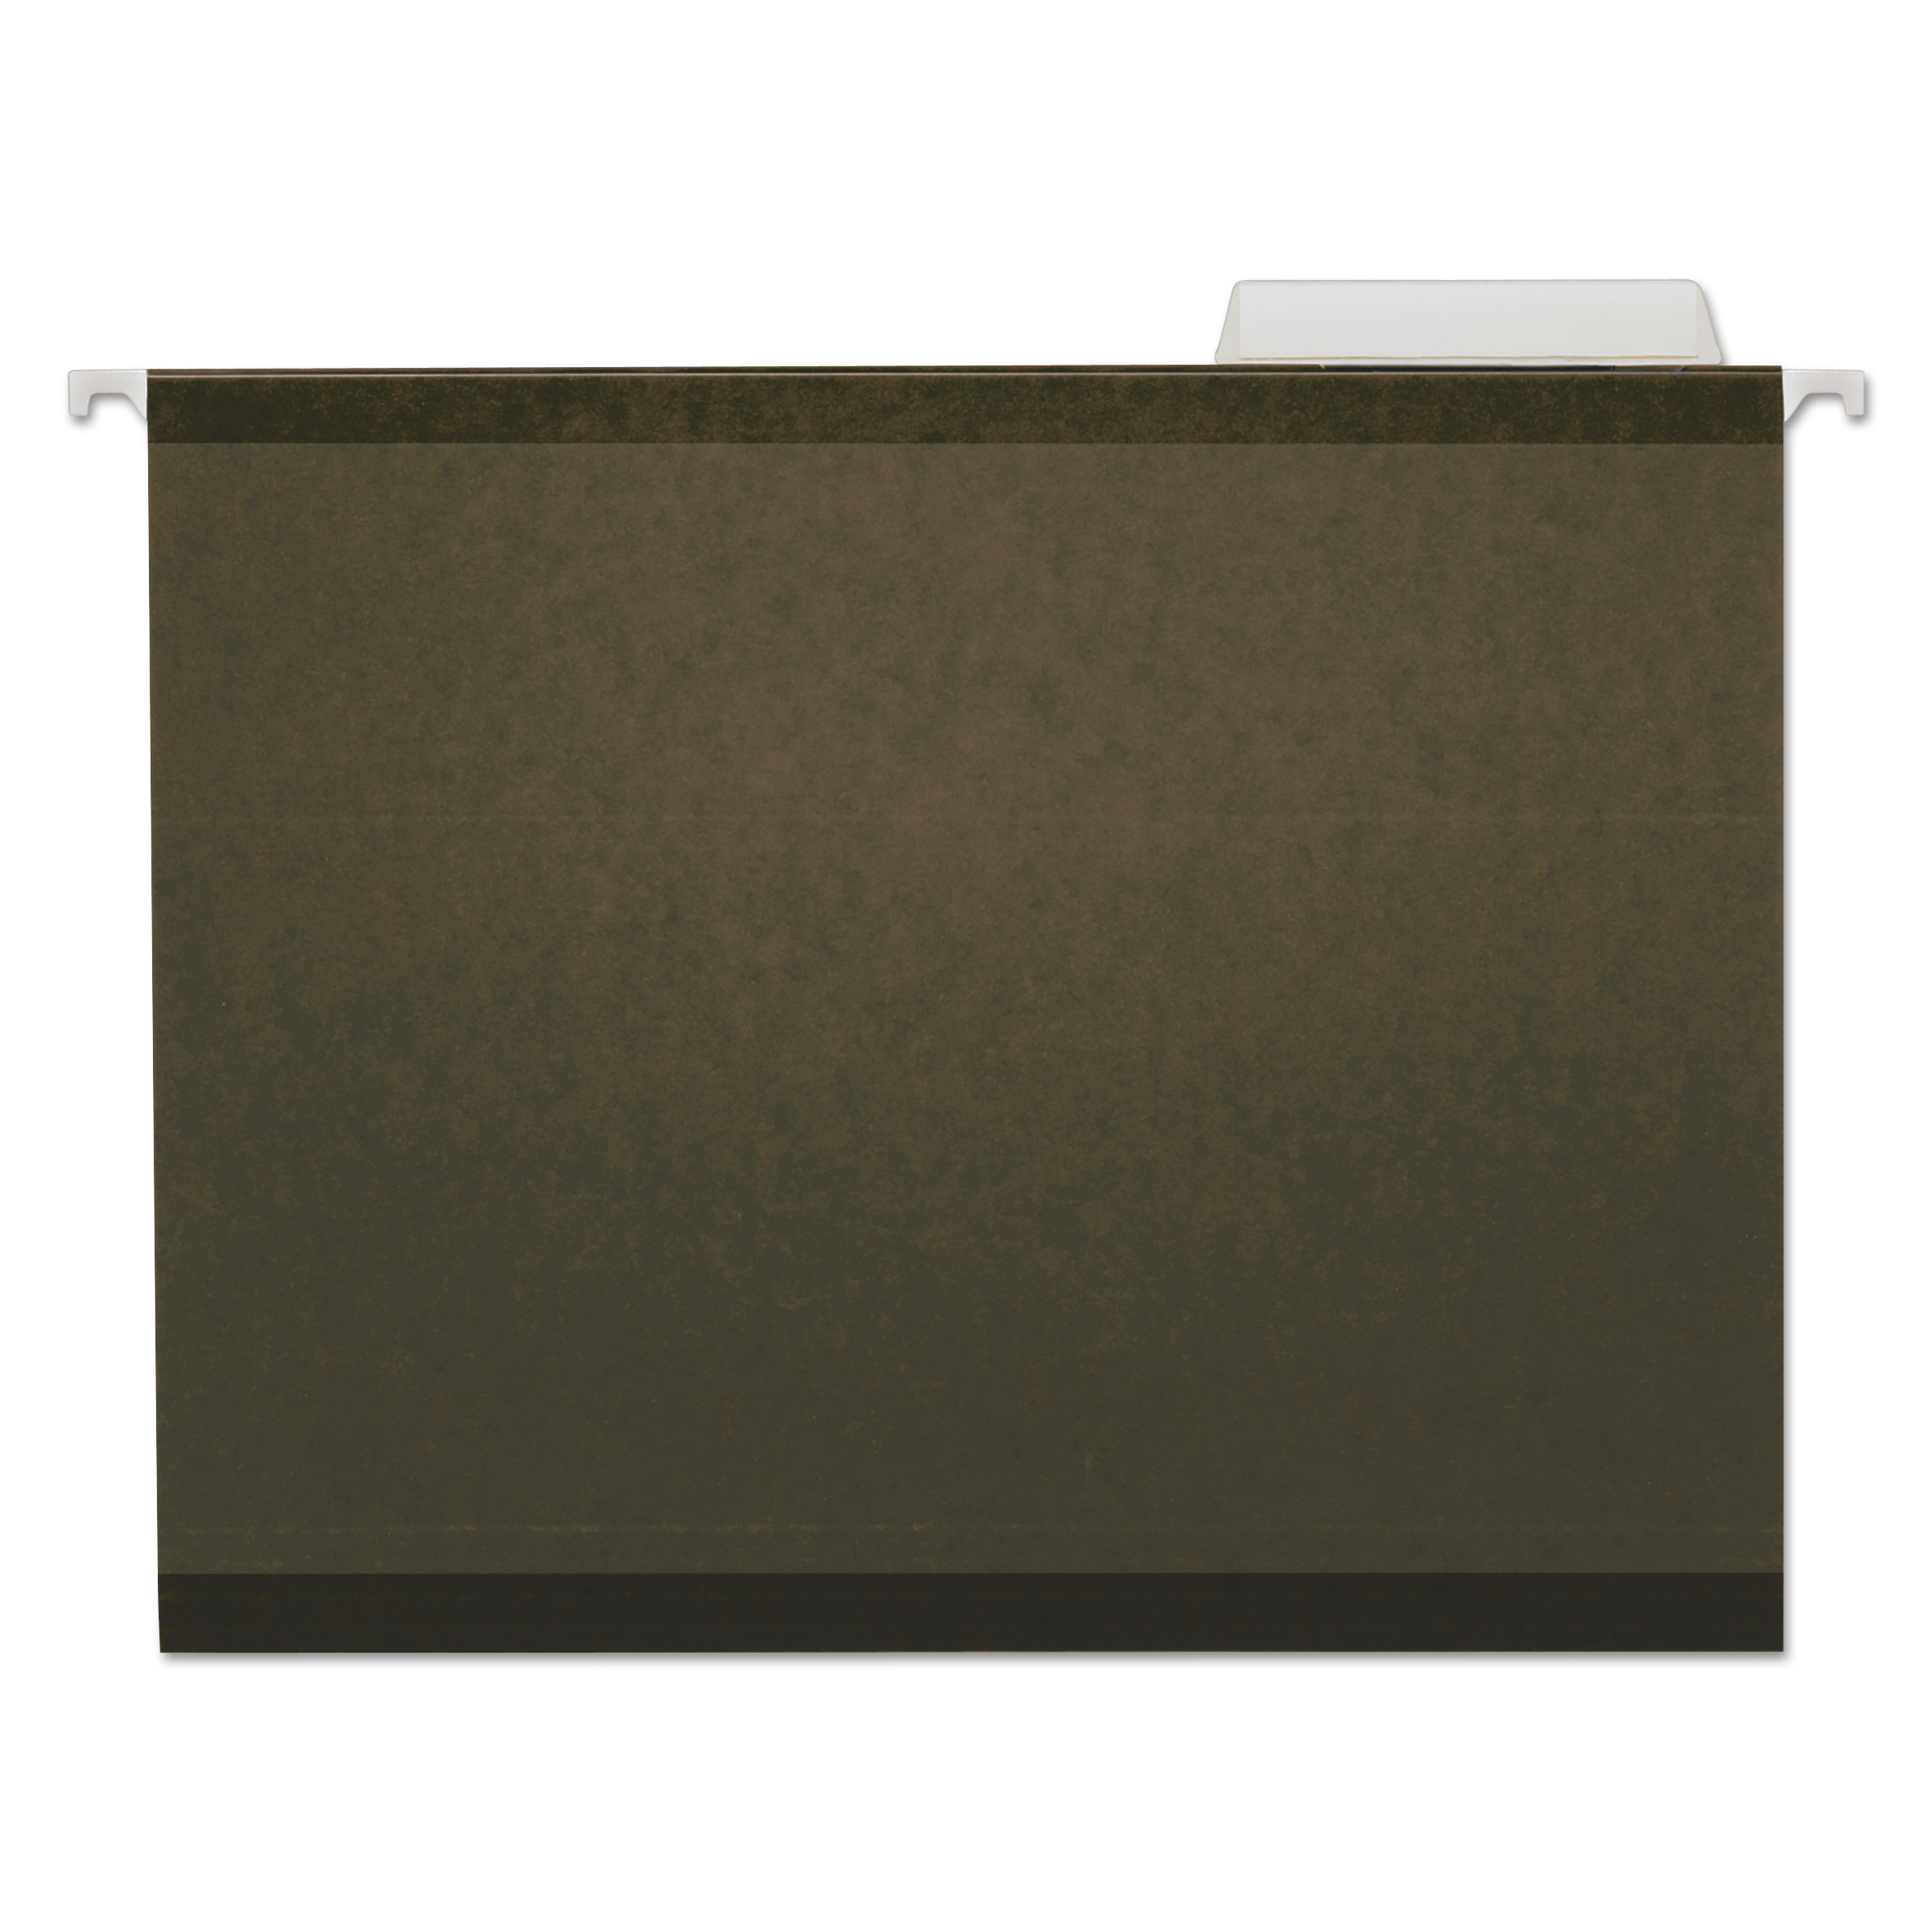  Universal UNV24113 Deluxe Reinforced Recycled Hanging File Folders, Letter Size, 1/3-Cut Tab, Standard Green, 25/Box (UNV24113) 